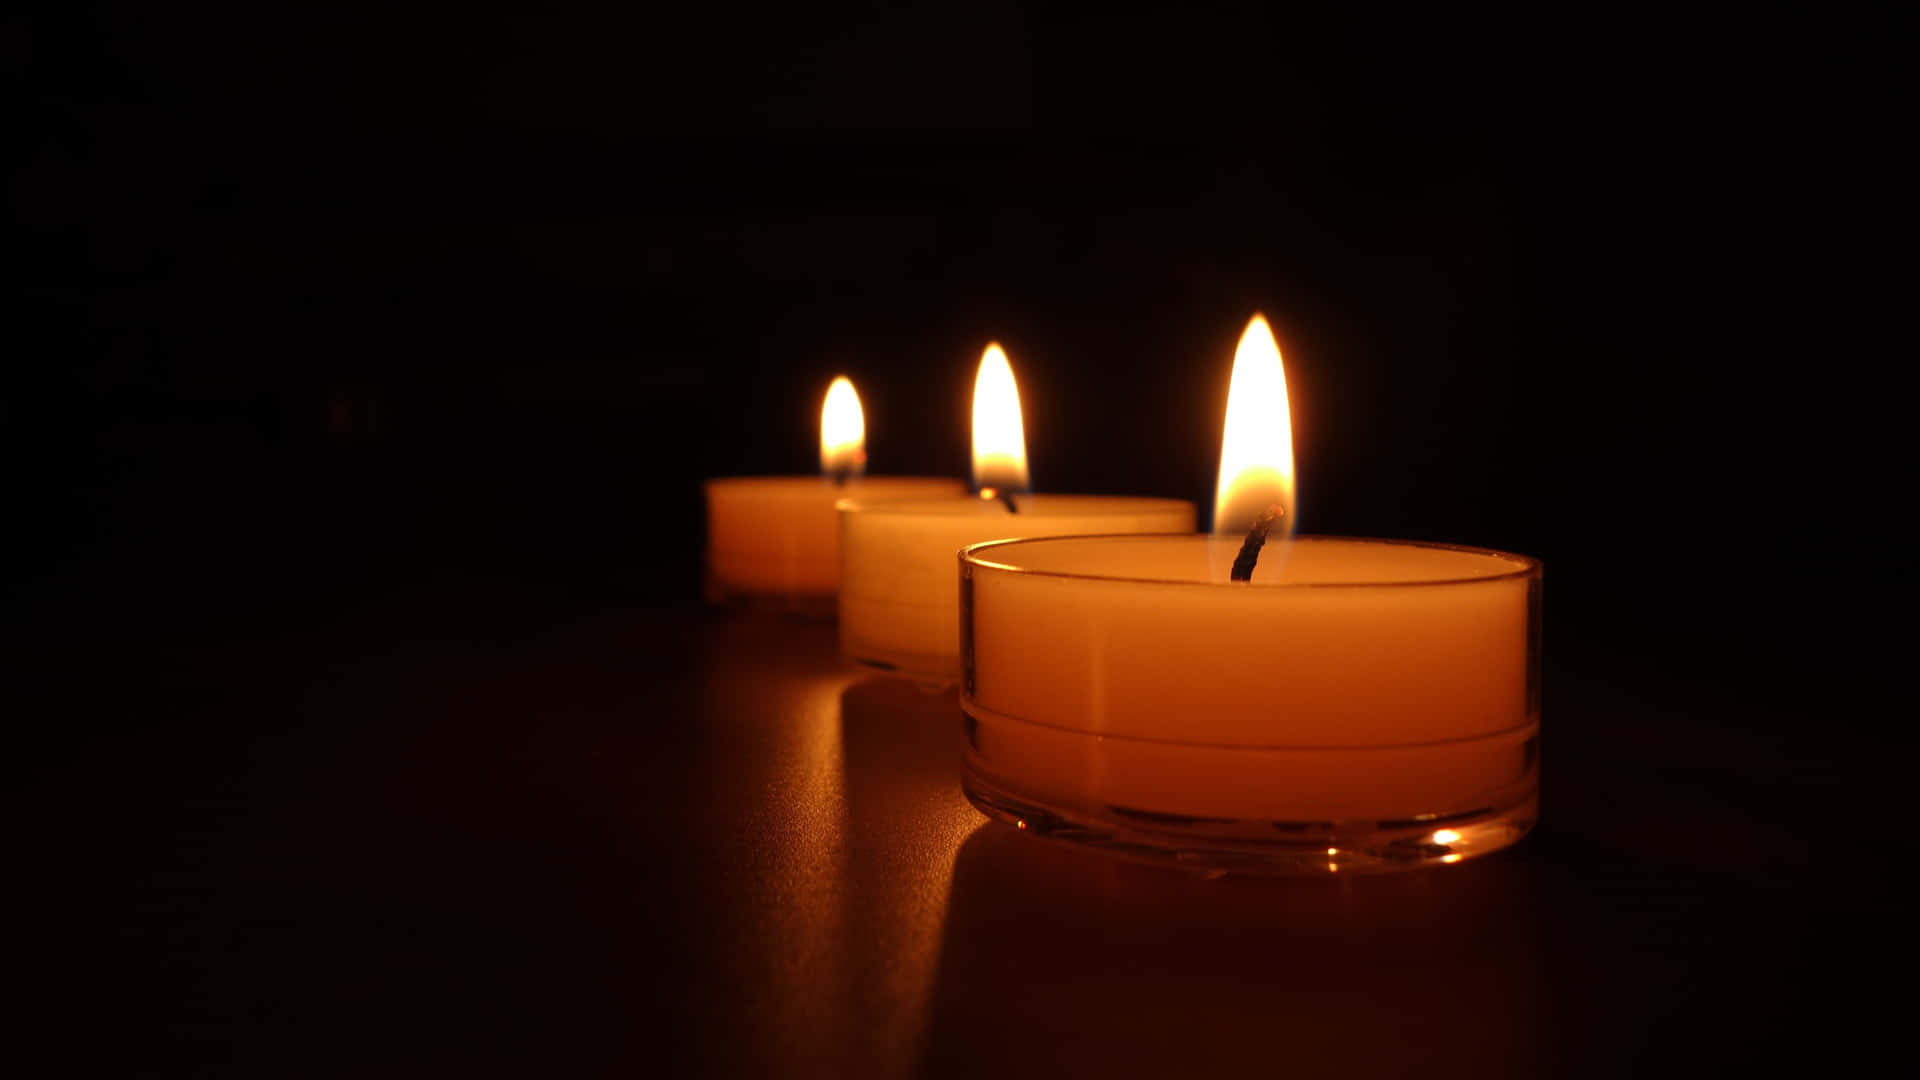 Illuminating the night with a candle flickering in the dark